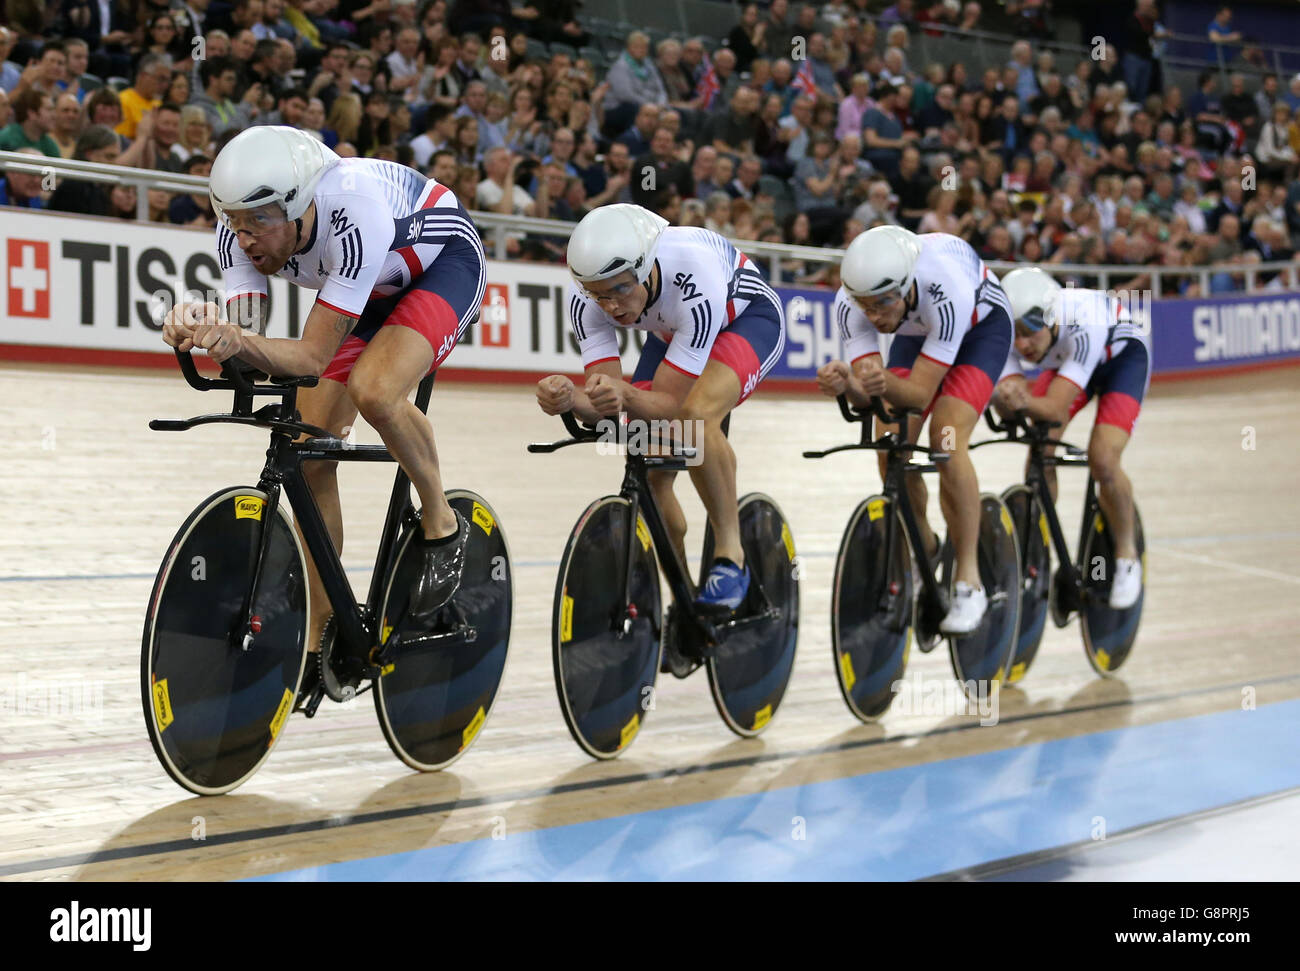 Great Britain's Sir Bradley Wiggins (left) during the Men's Team Pursuit qualifying during day one of the UCI Track Cycling World Championships at Lee Valley VeloPark, London. Stock Photo